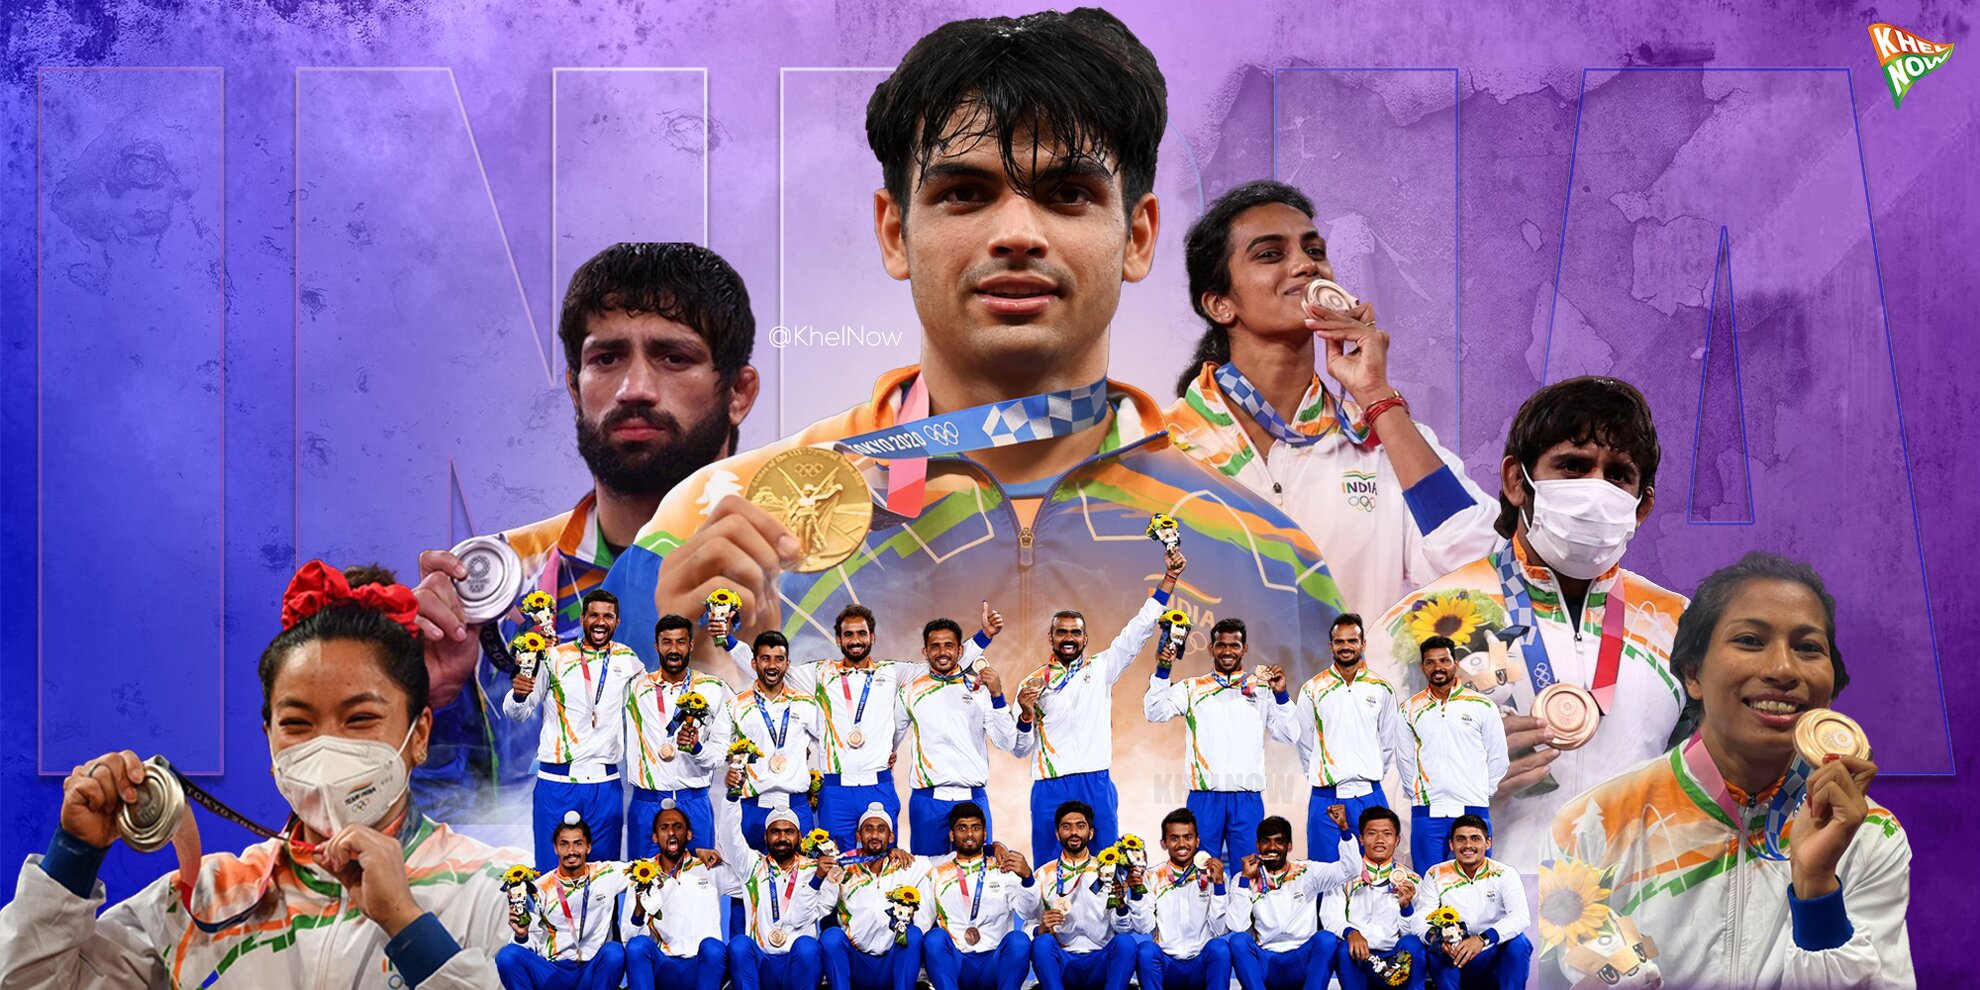 All medal winners from India at the Tokyo Olympics 2020